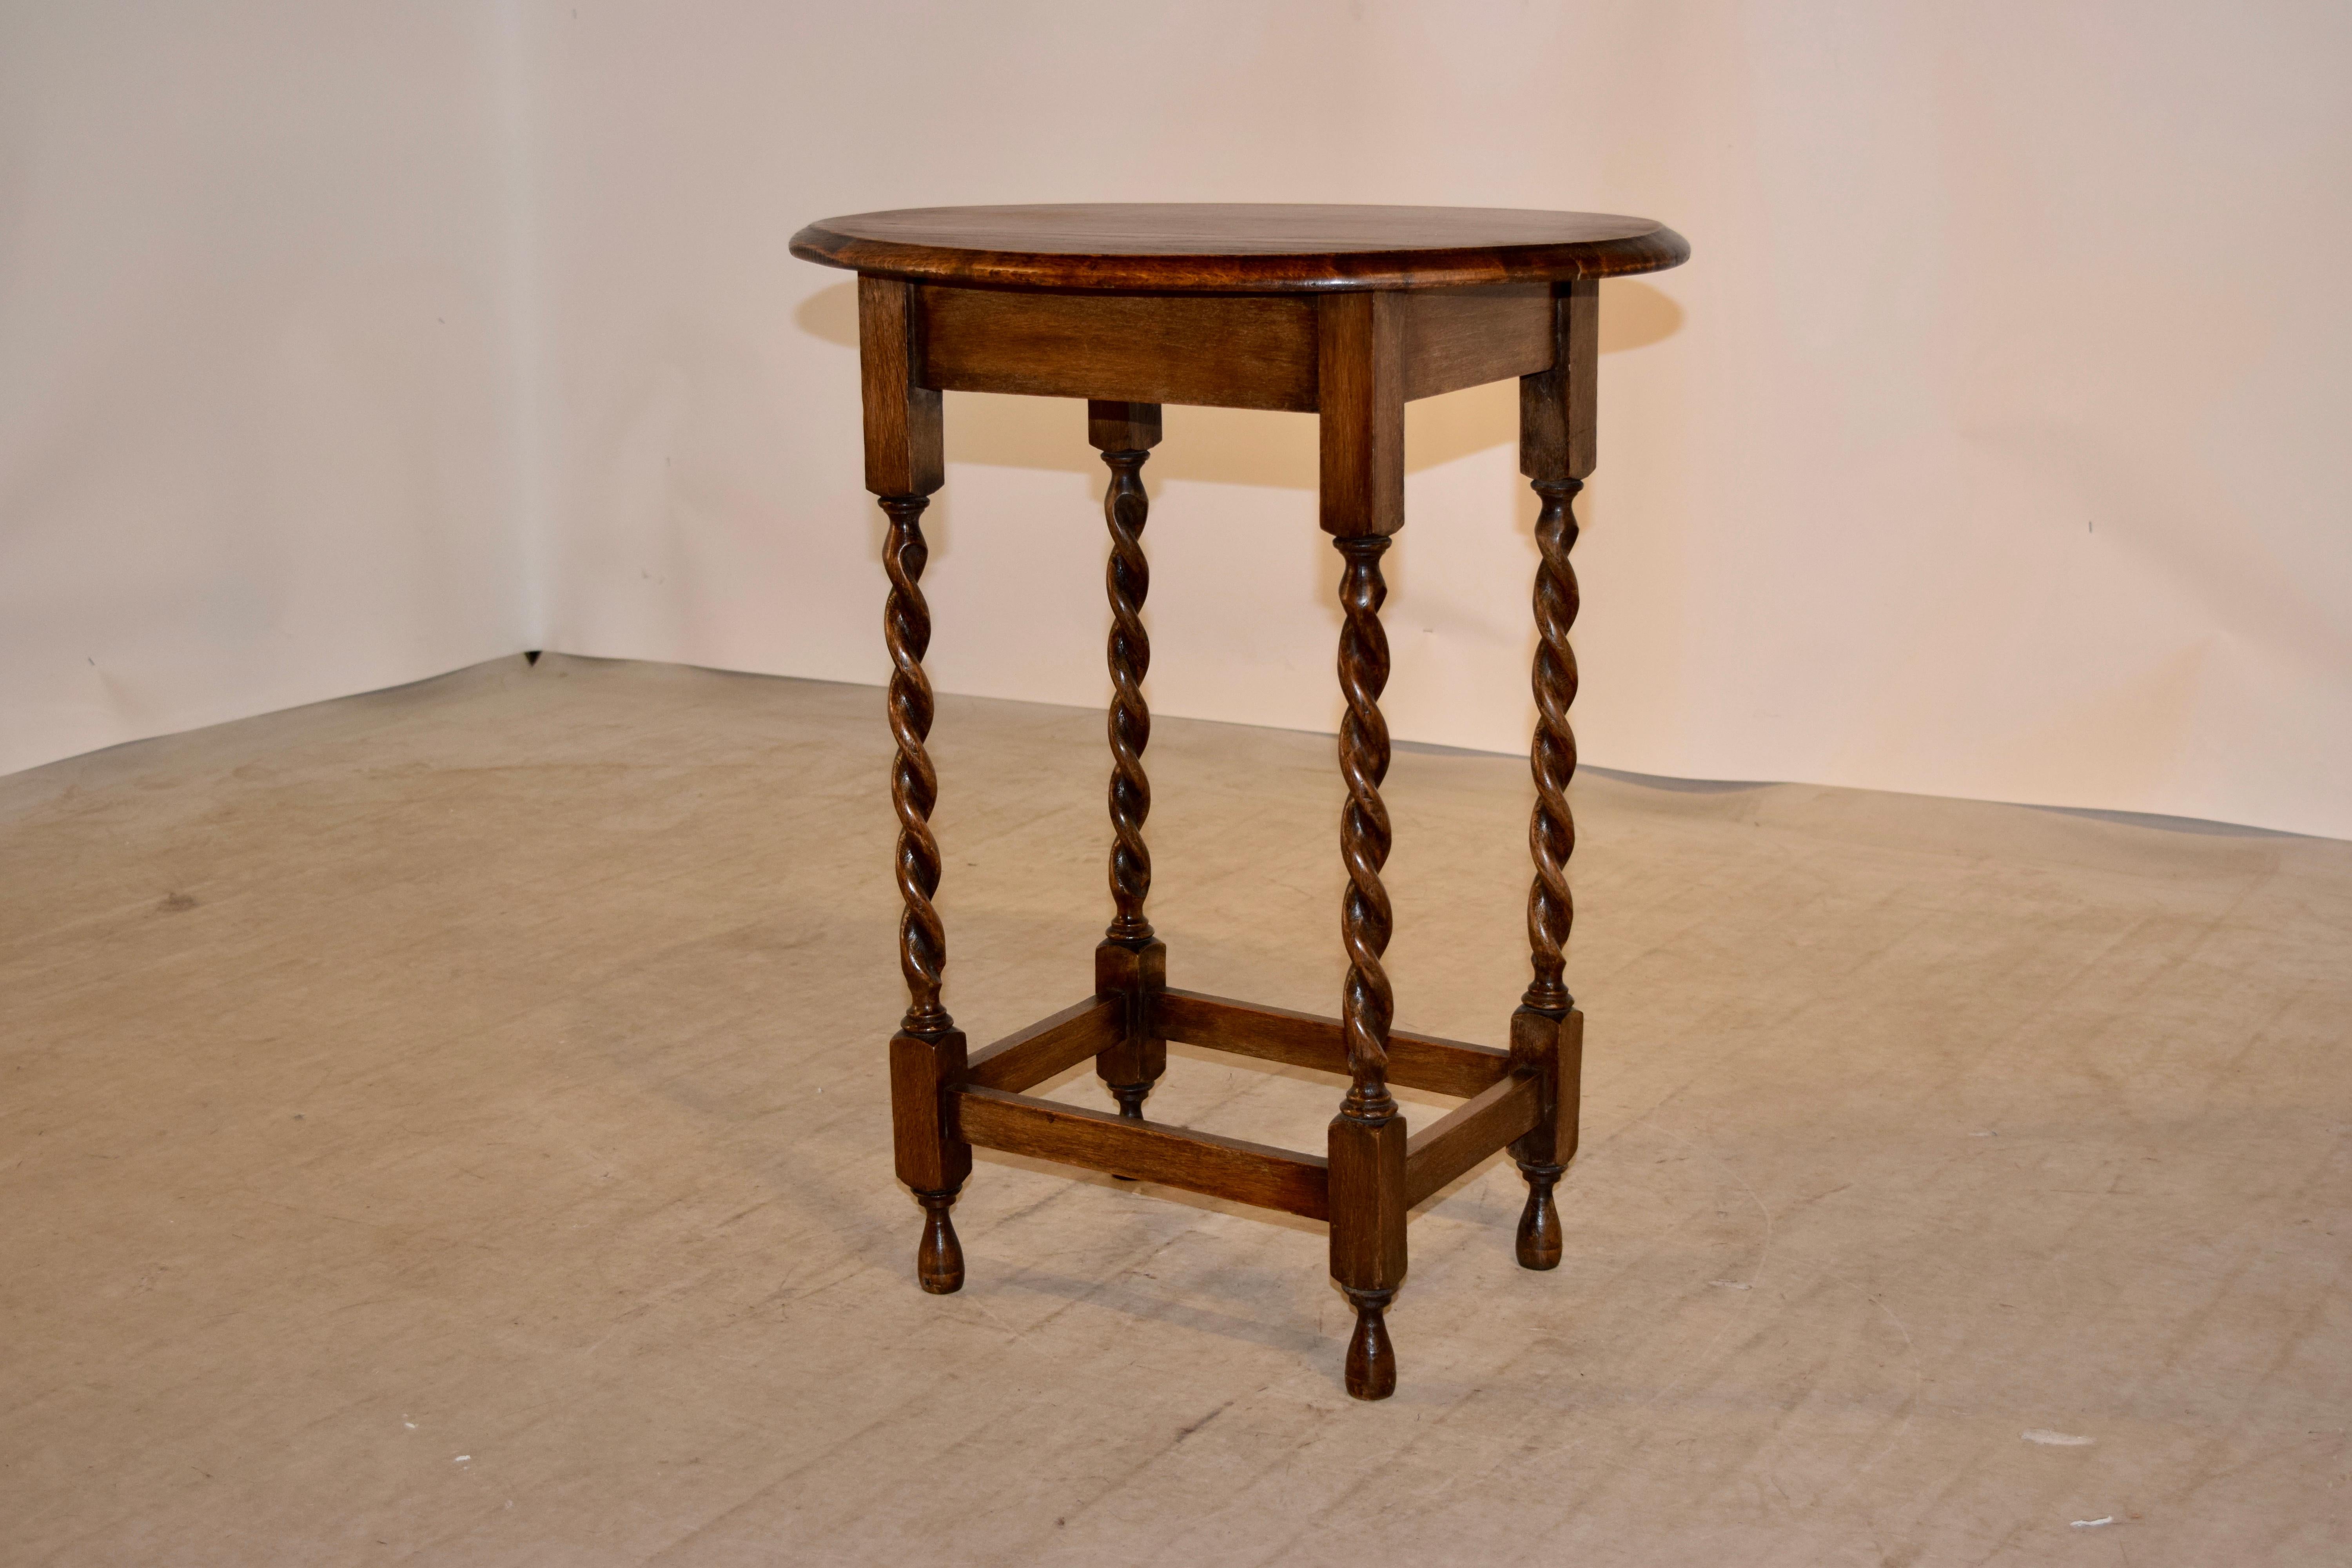 English oak side table with an oval shaped top, which has a beveled edge and follows down to a simple apron and is supported on hand-turned barley twist legs, joined by simple stretchers and raised on hand-turned feet.